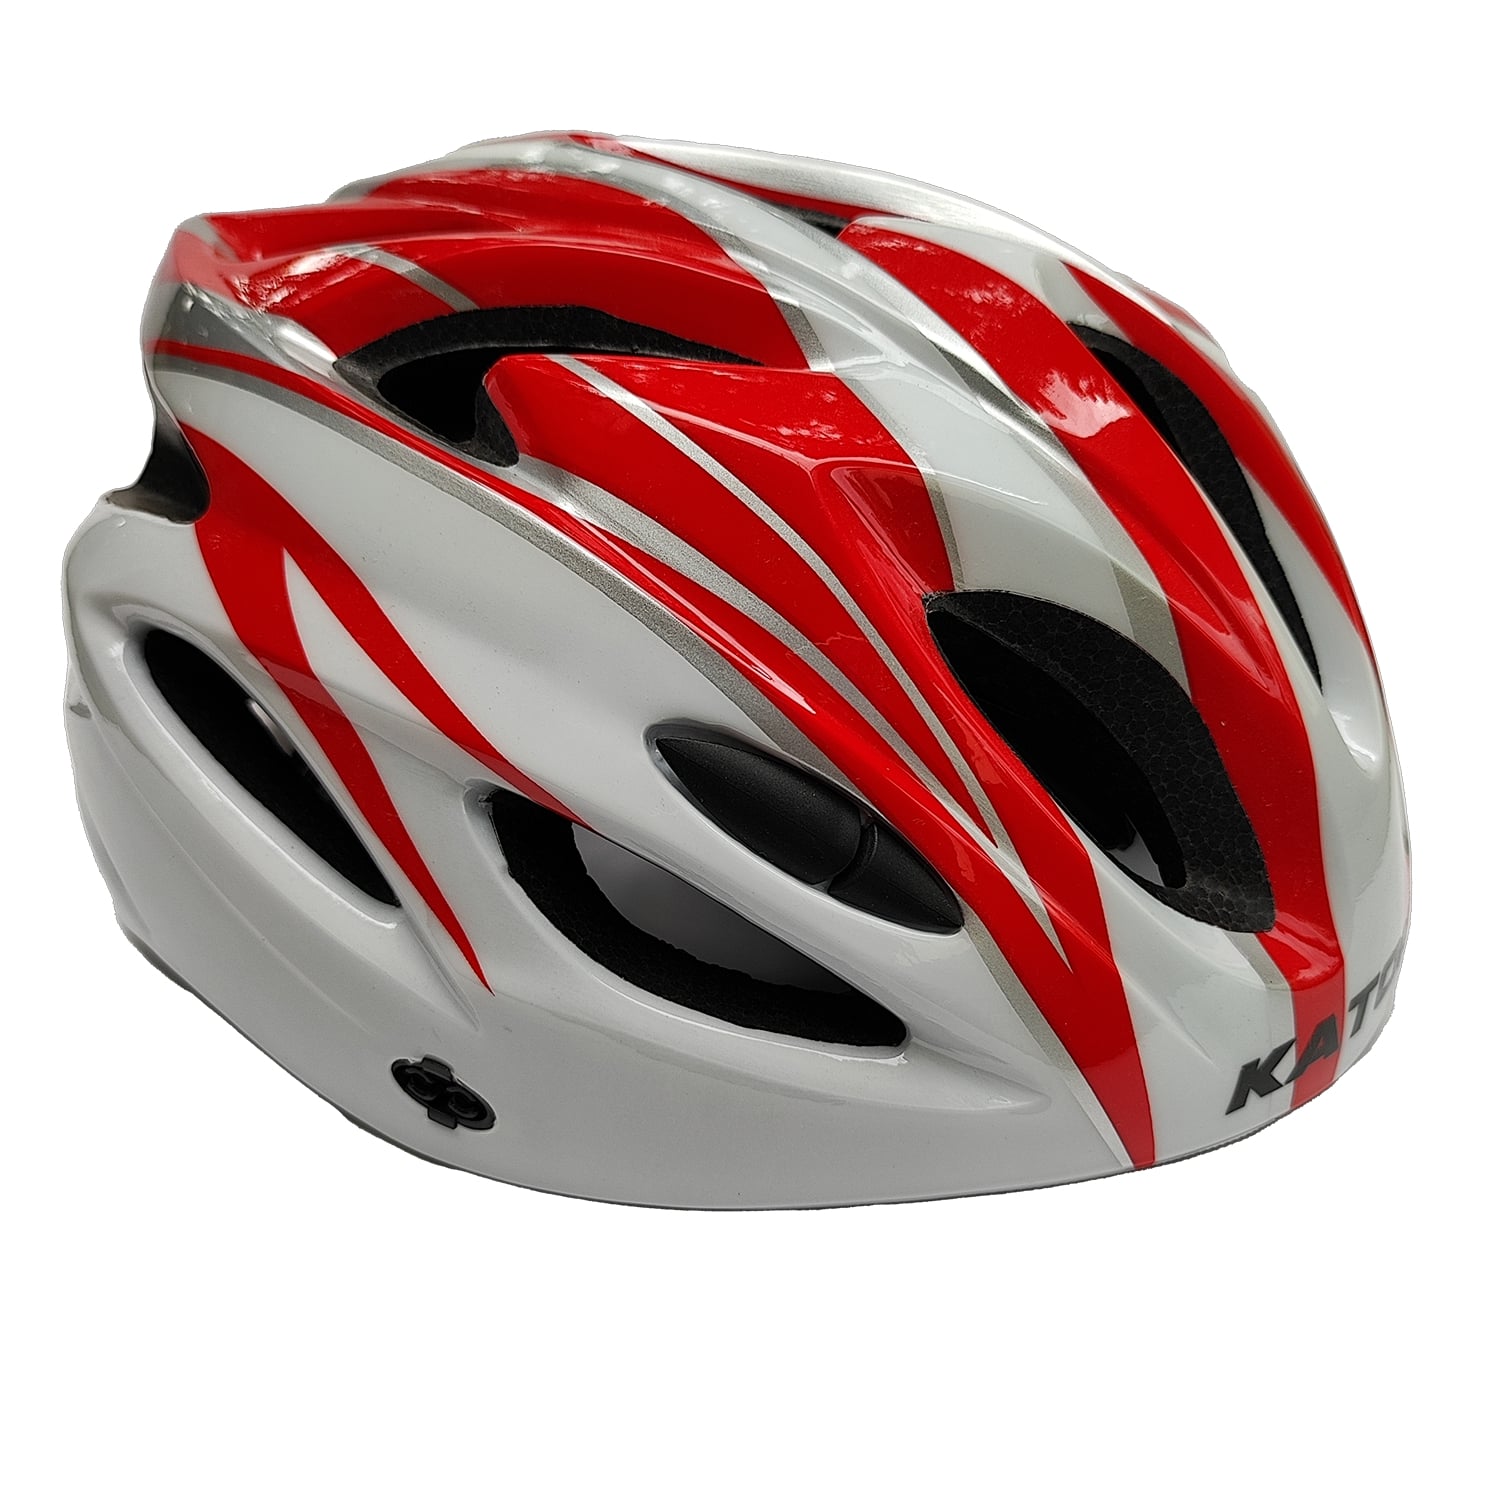 Shop Online Bicycle Helmet Safety Gear by omo bikes for hybrid or mtb cycle top View red